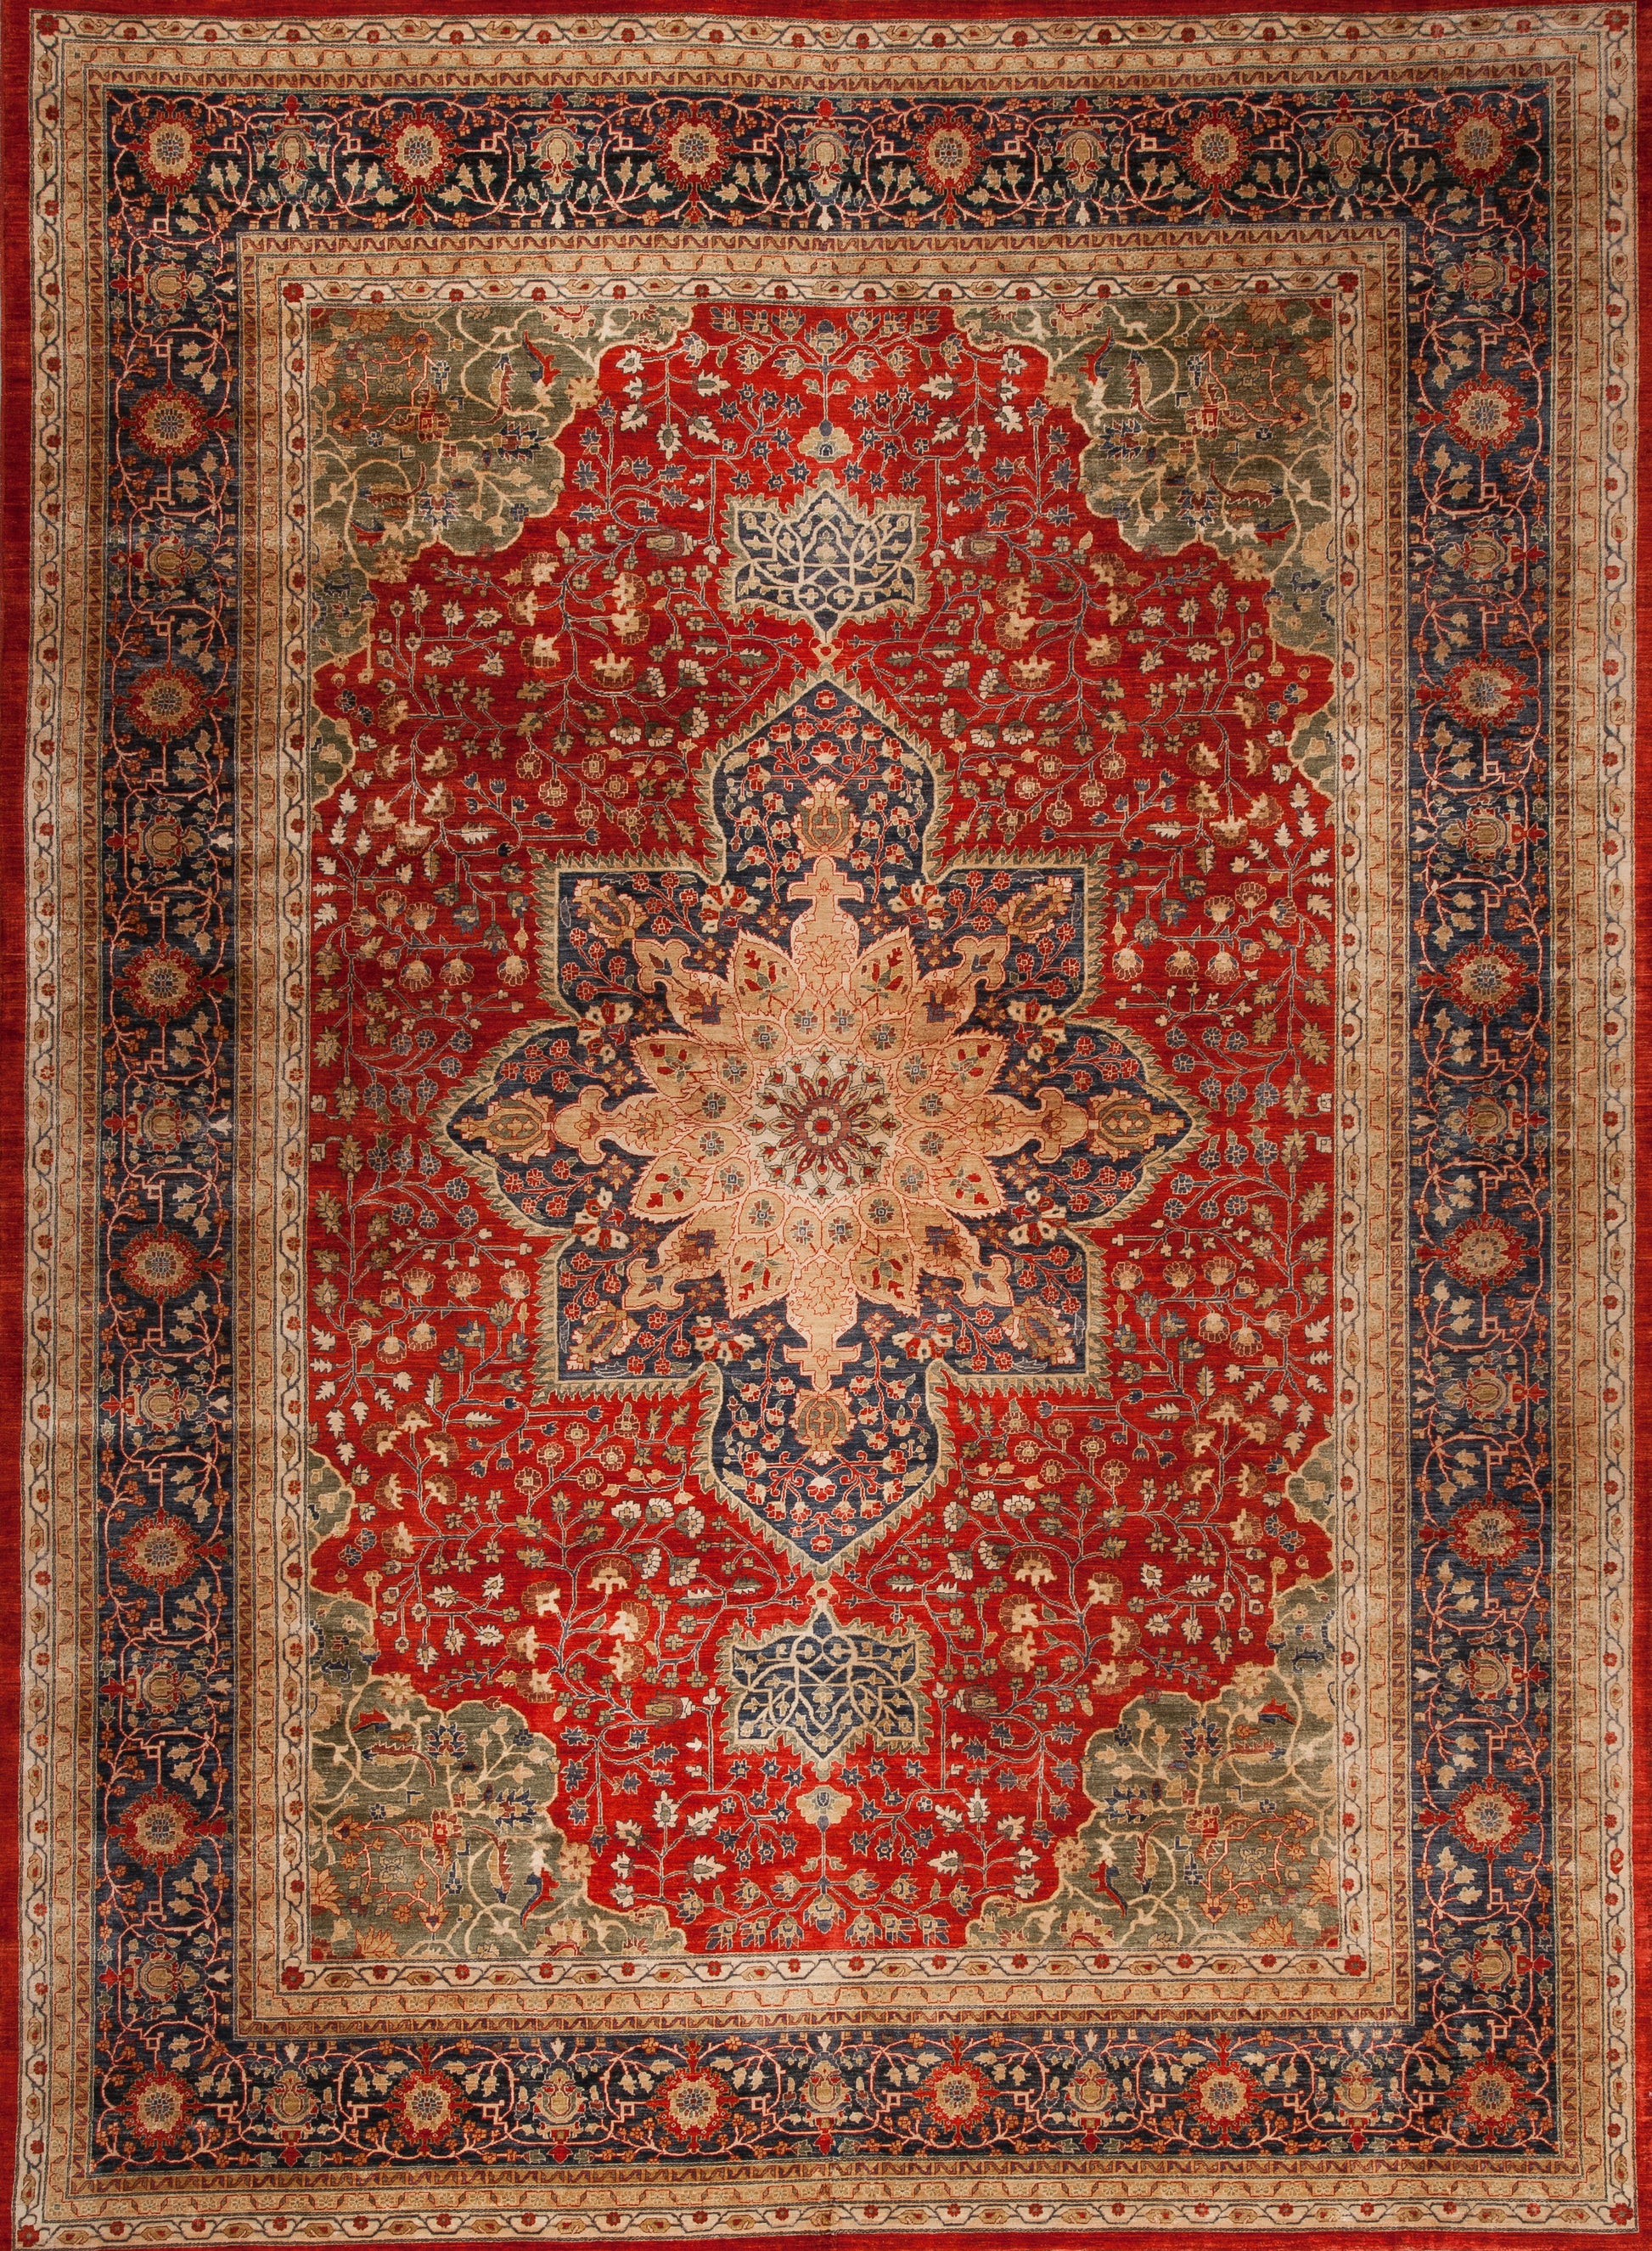 This classic rug comes directly from the Monarch collection and it's one of a kind. It was woven within the intensity of red, burgundy tones, and yellow. This first-class carpet has a bright red background and a large mandala on top.